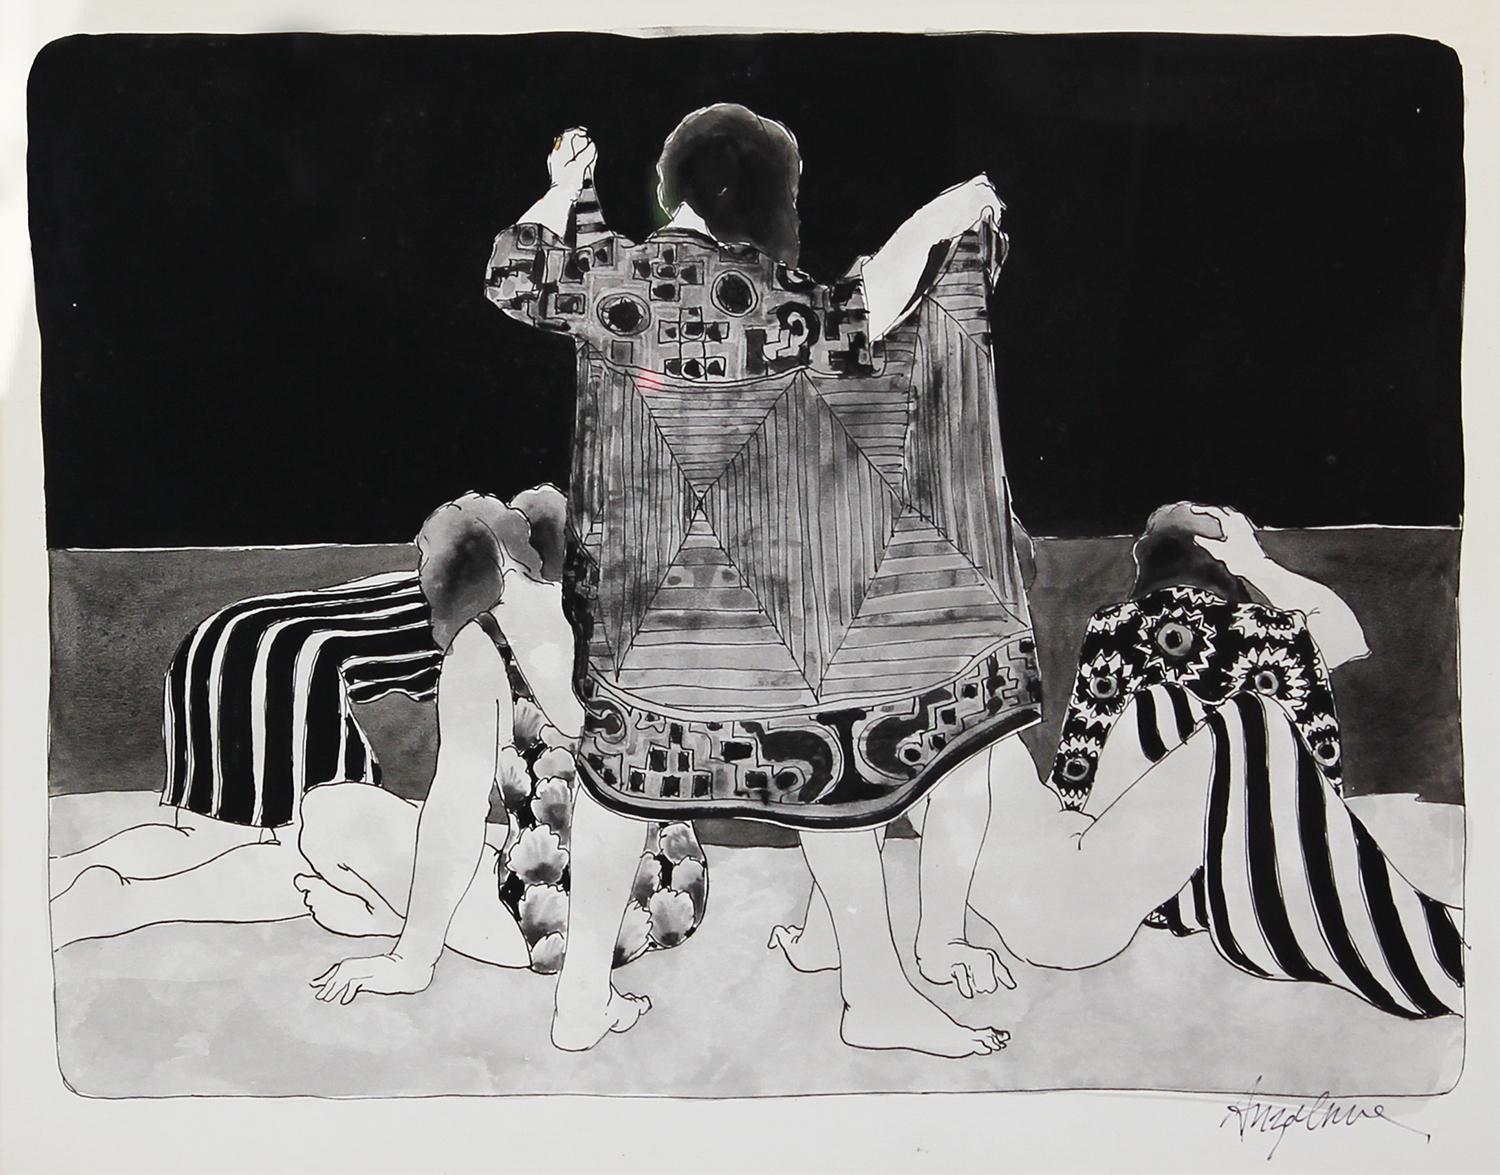 Black and white figurative drawing by Texas artist William Anzalone. The drawing depicts five nude women hanging out by what appears to be an abstract beach landscape. Signed by the artist at the bottom right. Framed in a beautiful black modern